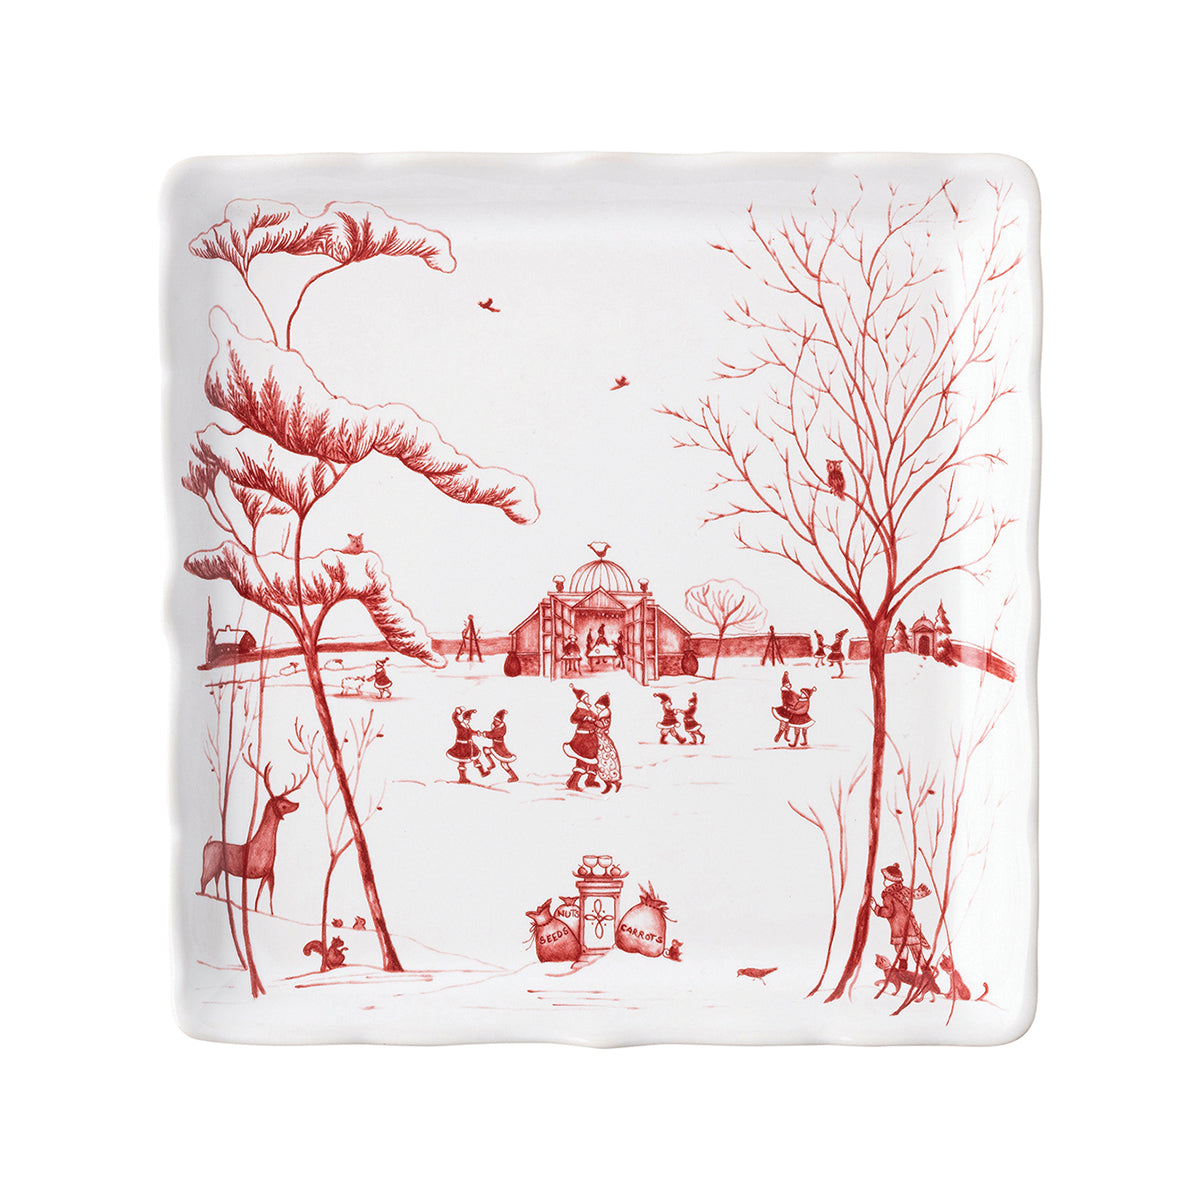 Our charming English Country Estate is snow covered for the holidays! In this latest chapter of the estate at Christmastime, Santa &amp; Merry celebrate with all the North Pole inhabitants. This square sweets tray features an illustration of the Claus' and elves dancing together outside the Conservatory.